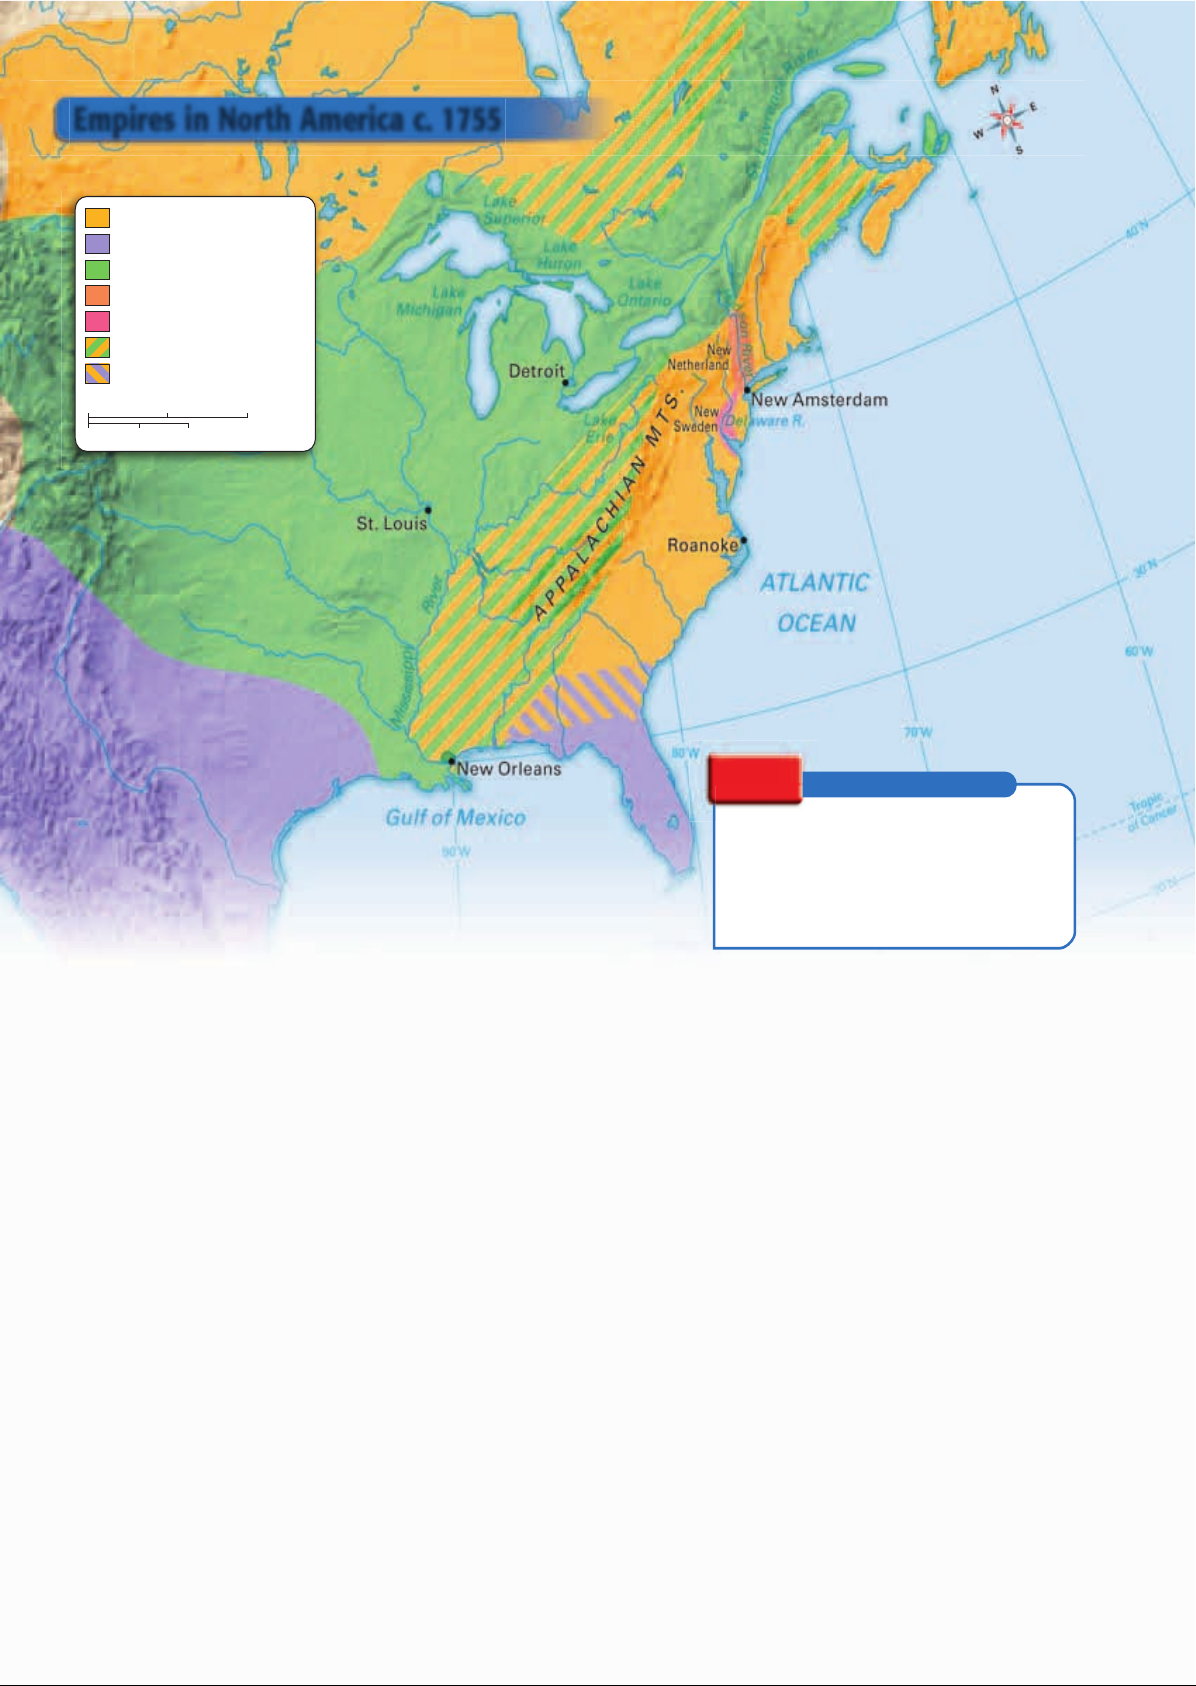 US_History_Textbook_8th_Grade_Chapter_1_Early_Exploration_and_Settlement_gvim3eB Image-22